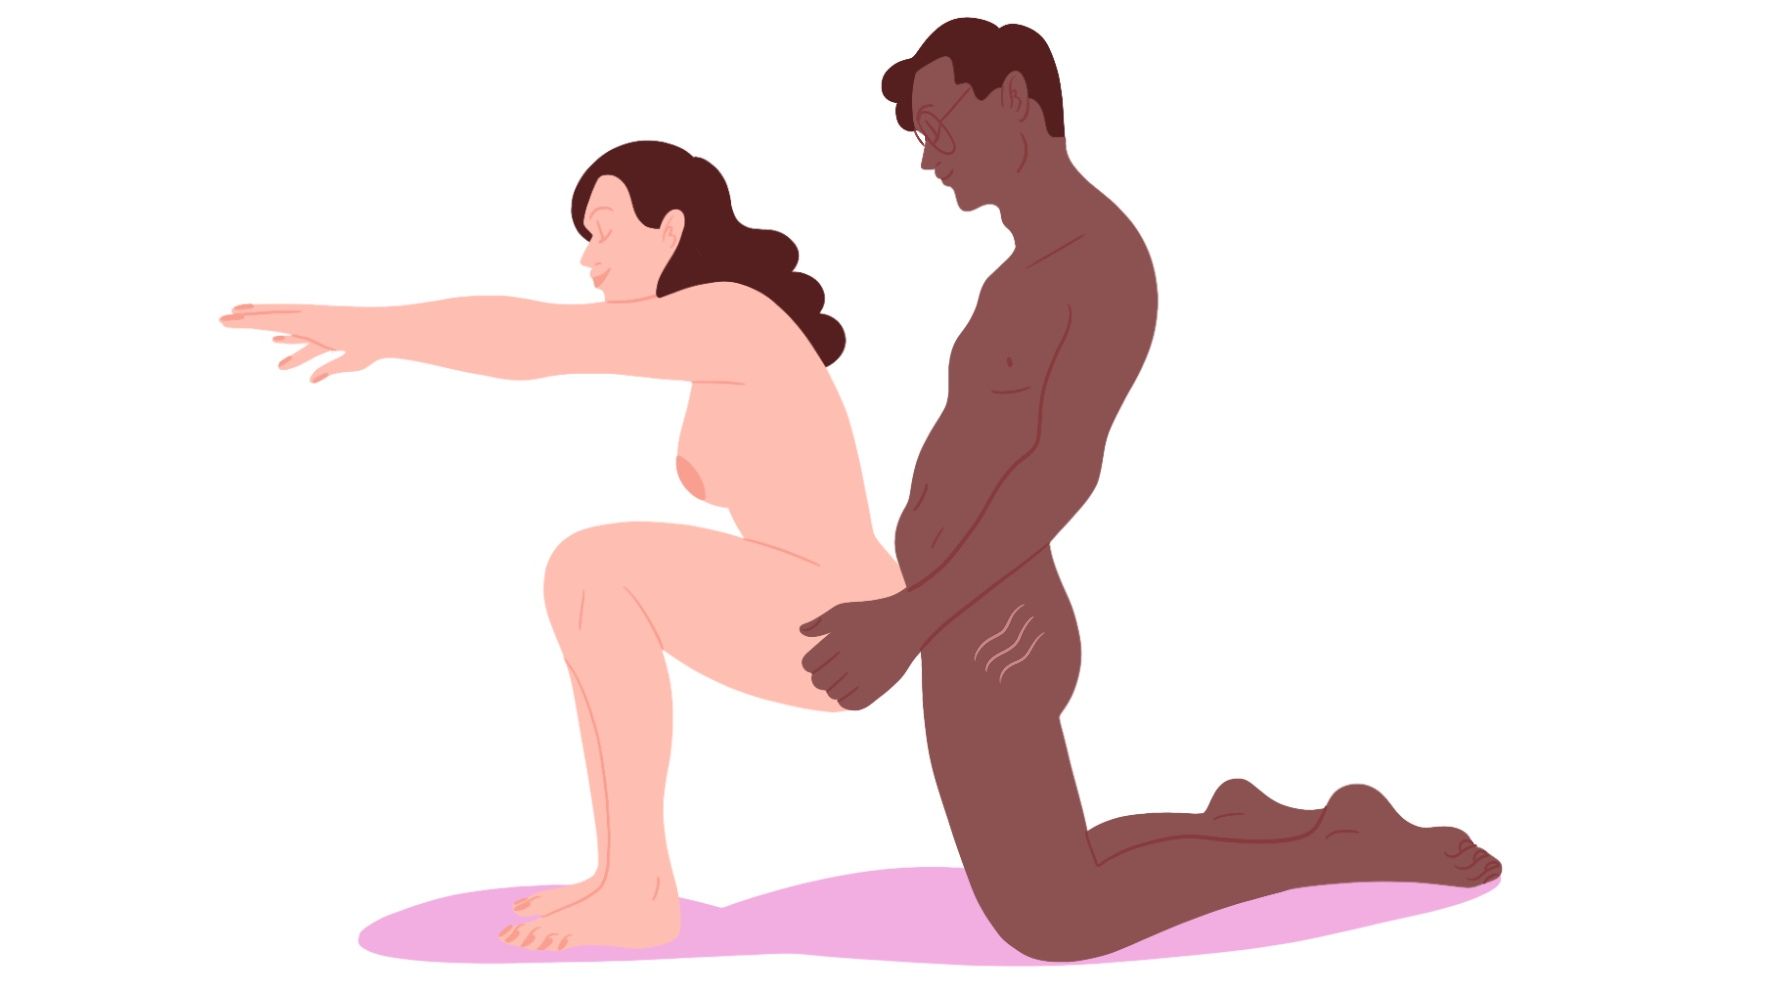 1778px x 1000px - 8 Sex Positions for Married Couples - Adventurous Sex Positions